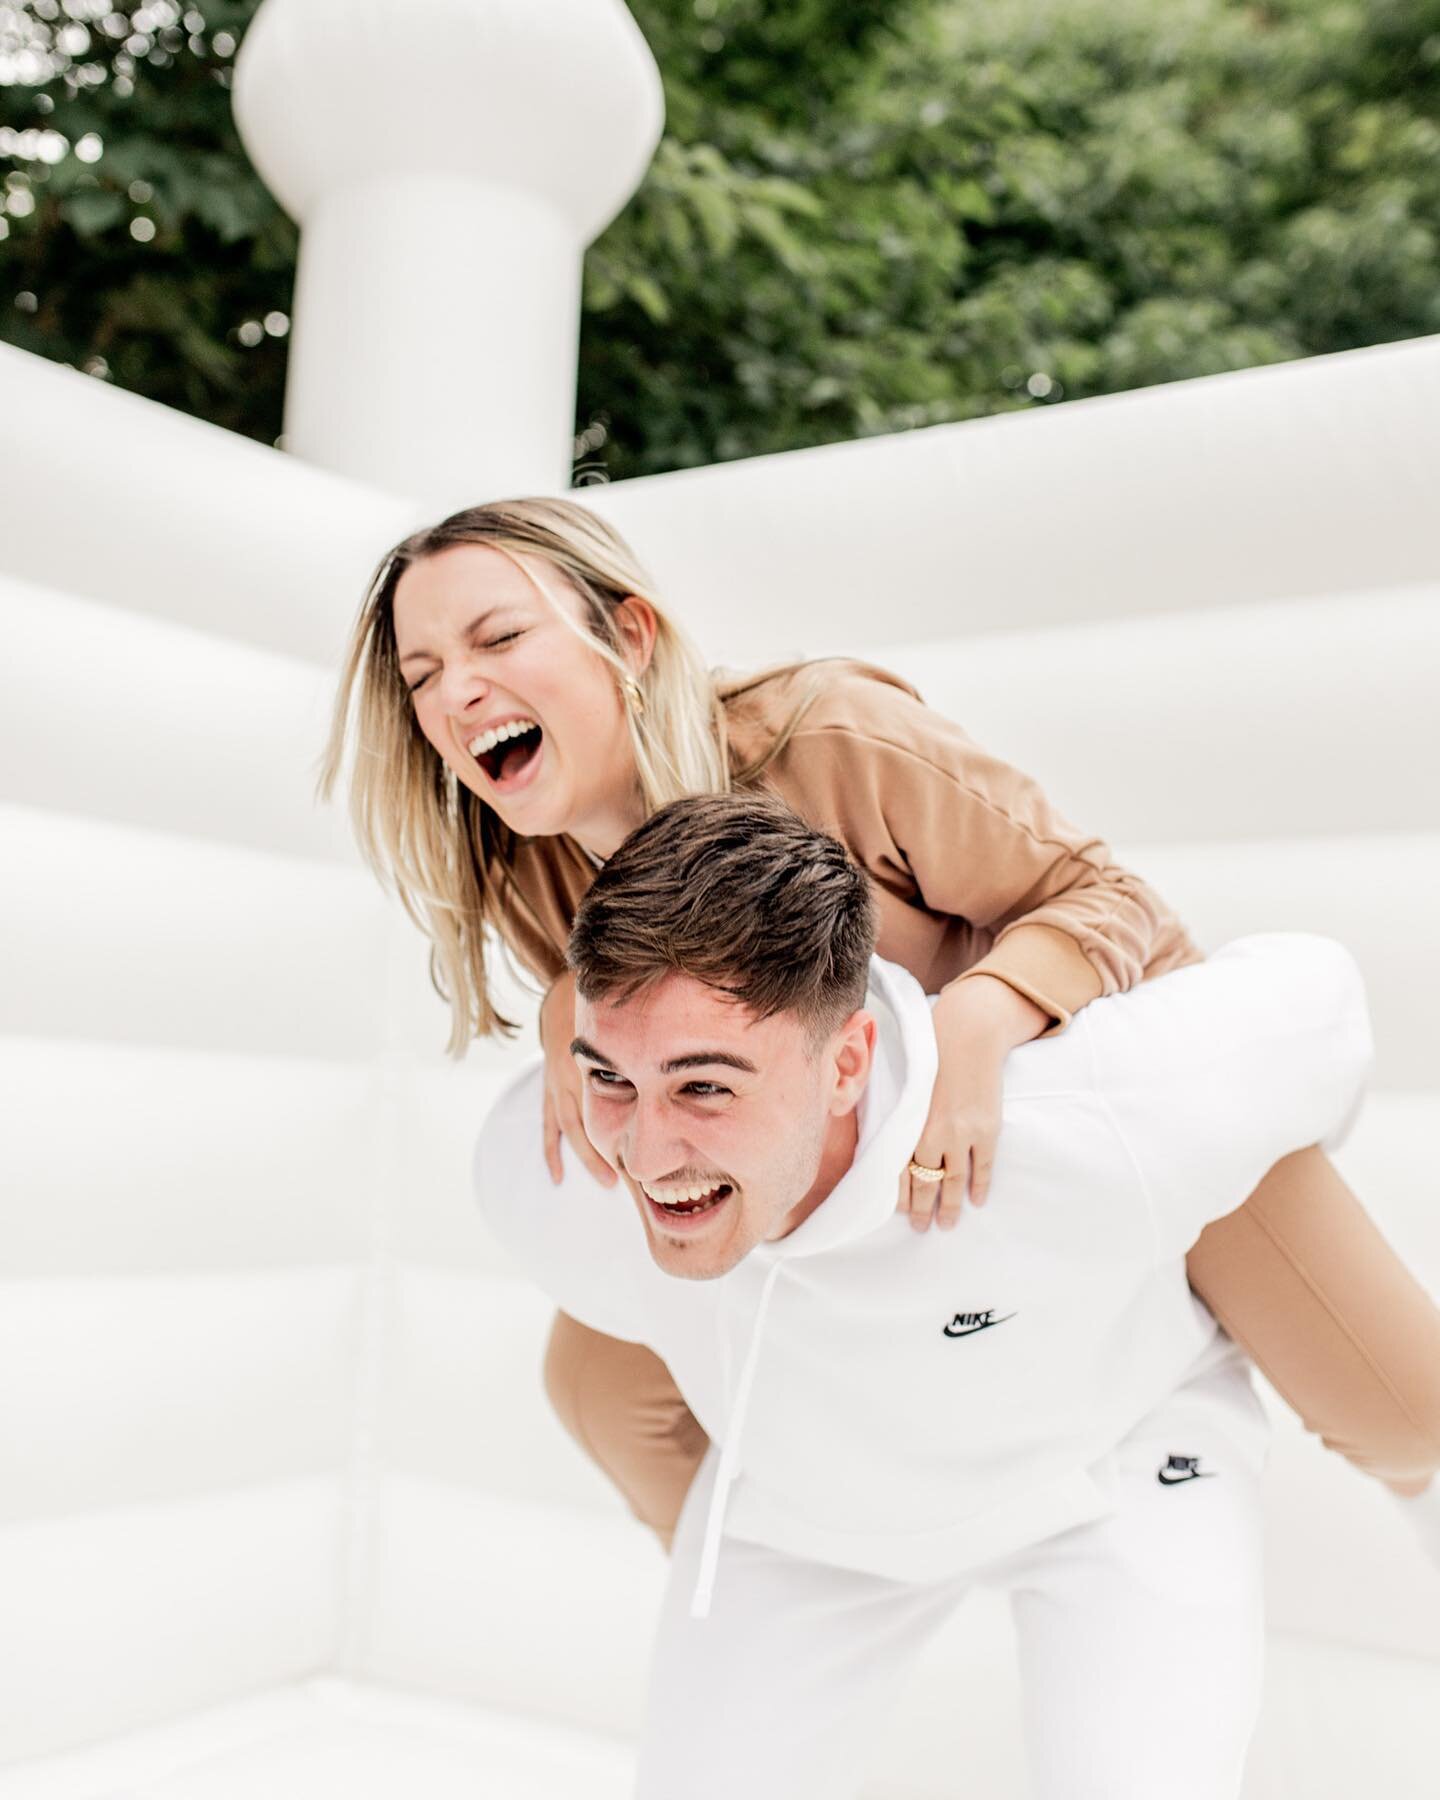 Our bounce castles are perfect for a date night in 🤍 Grab your best friend and let&rsquo;s have some fun! 
.
photographer: @natalievn.photography
bounce house: @inflatenashville
styling: @contentdaysco
.
#inflatedmv #datenight #whitebouncehouse #dmv